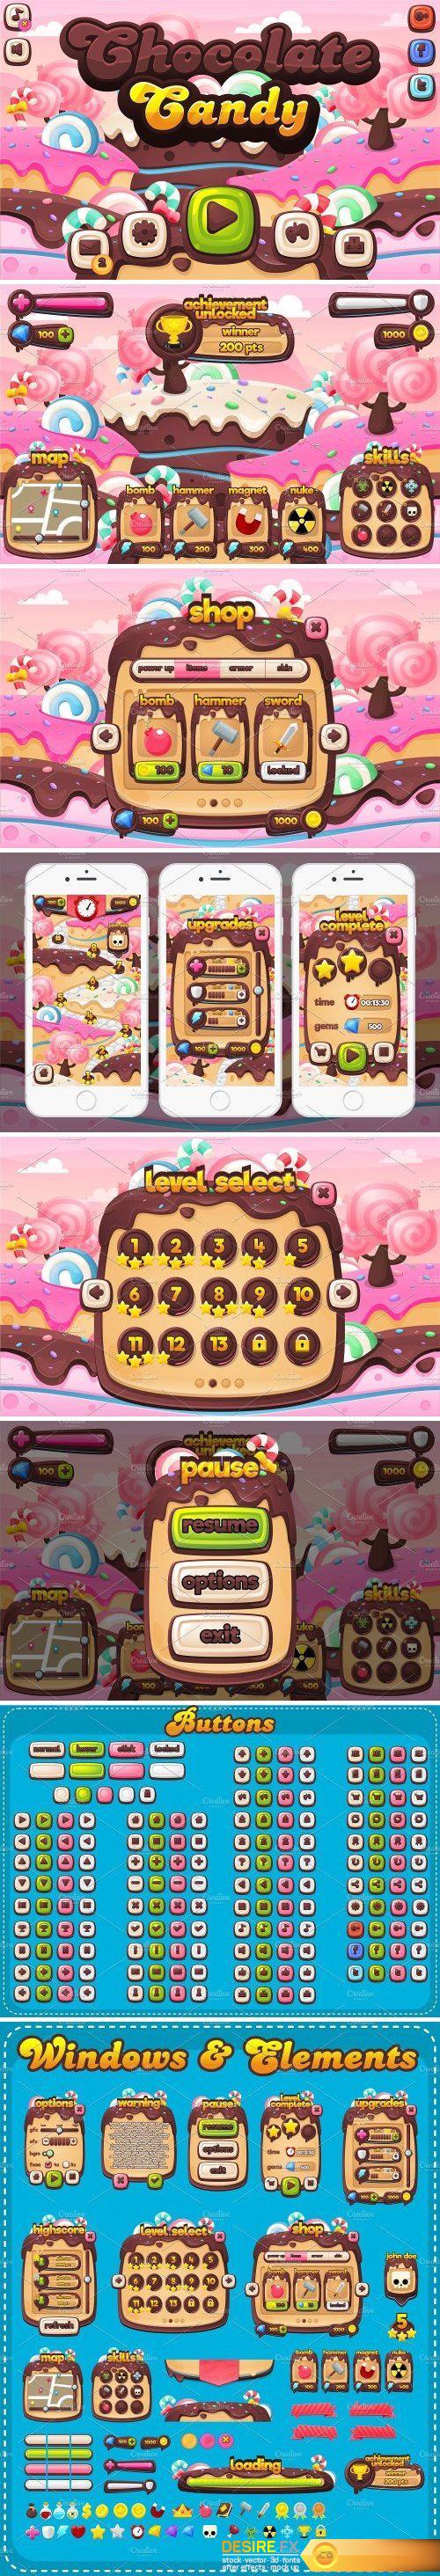 CM - Chocolate Candy - Game GUI 2080042